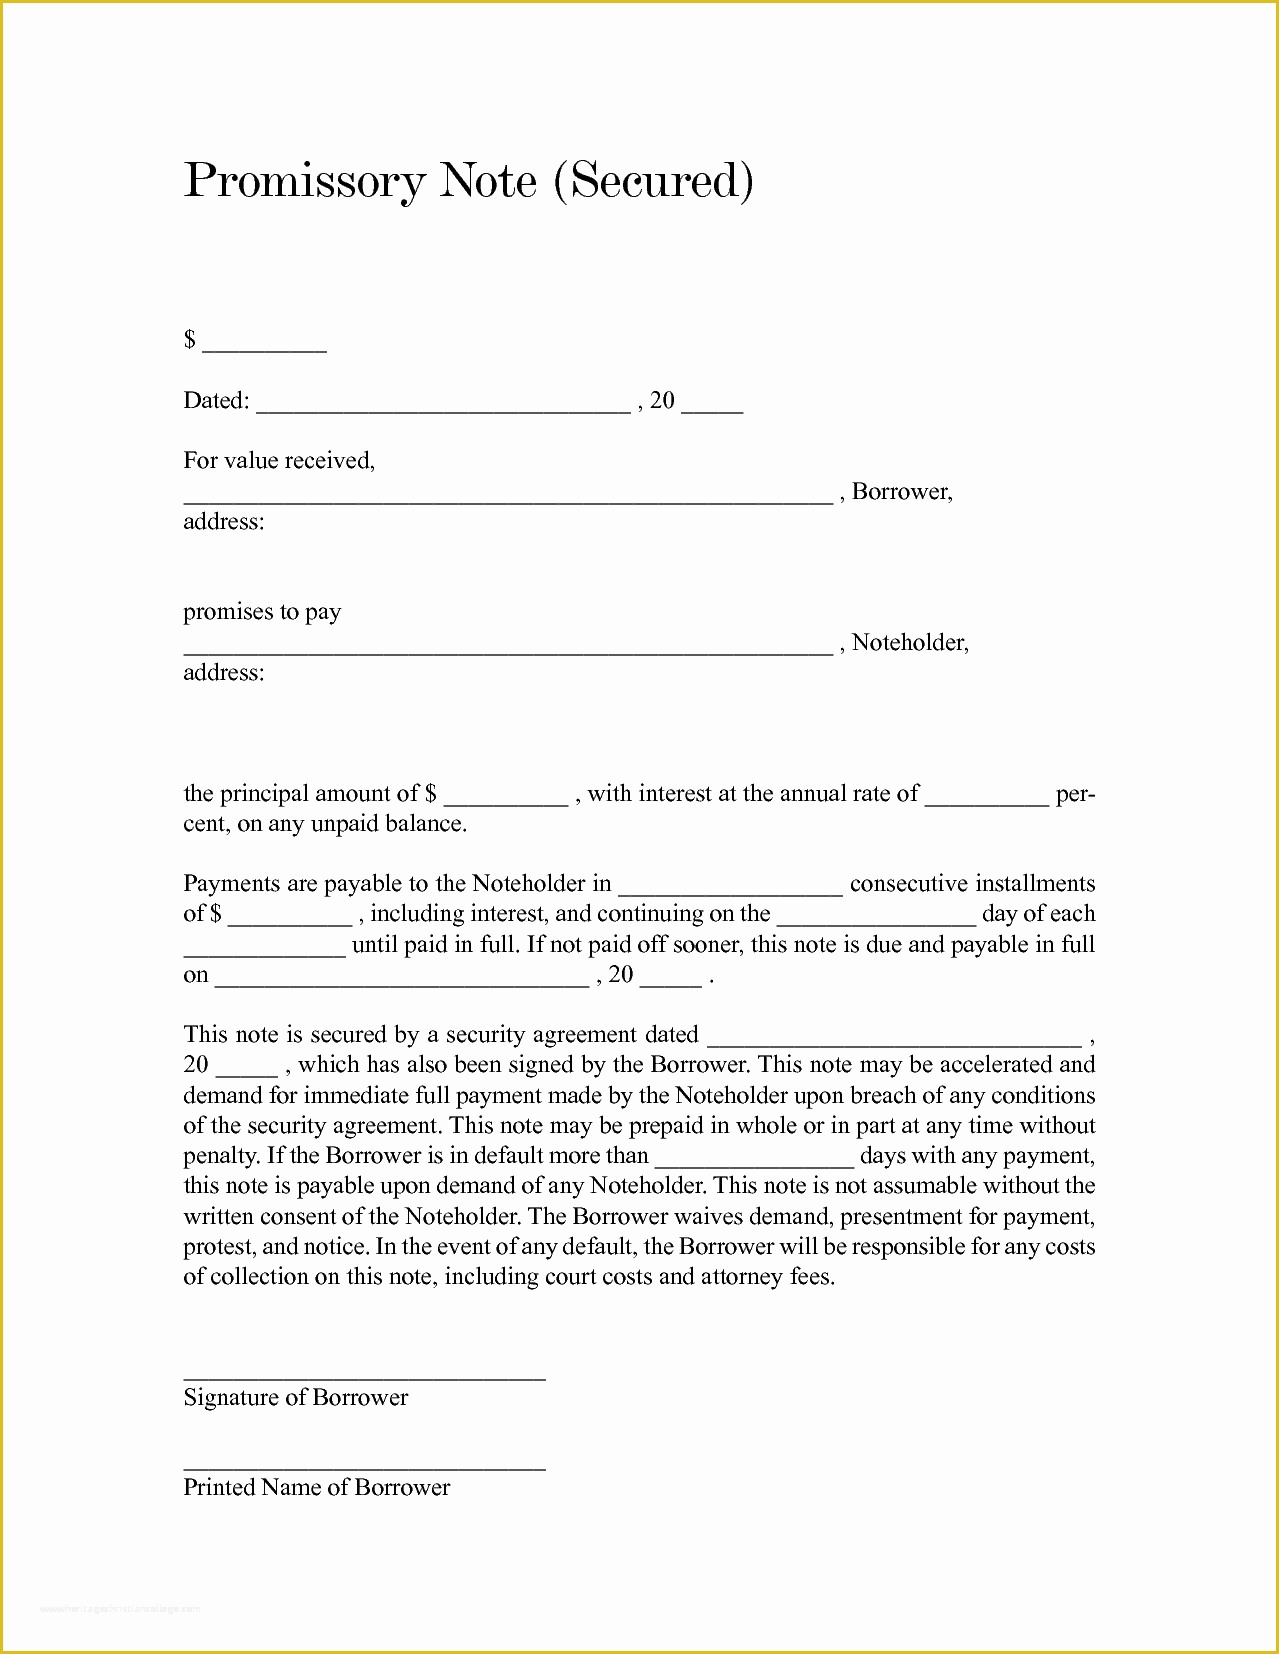 Free Promissory Note with Collateral Template Of Free Promissory Note Template Word Bamboodownunder